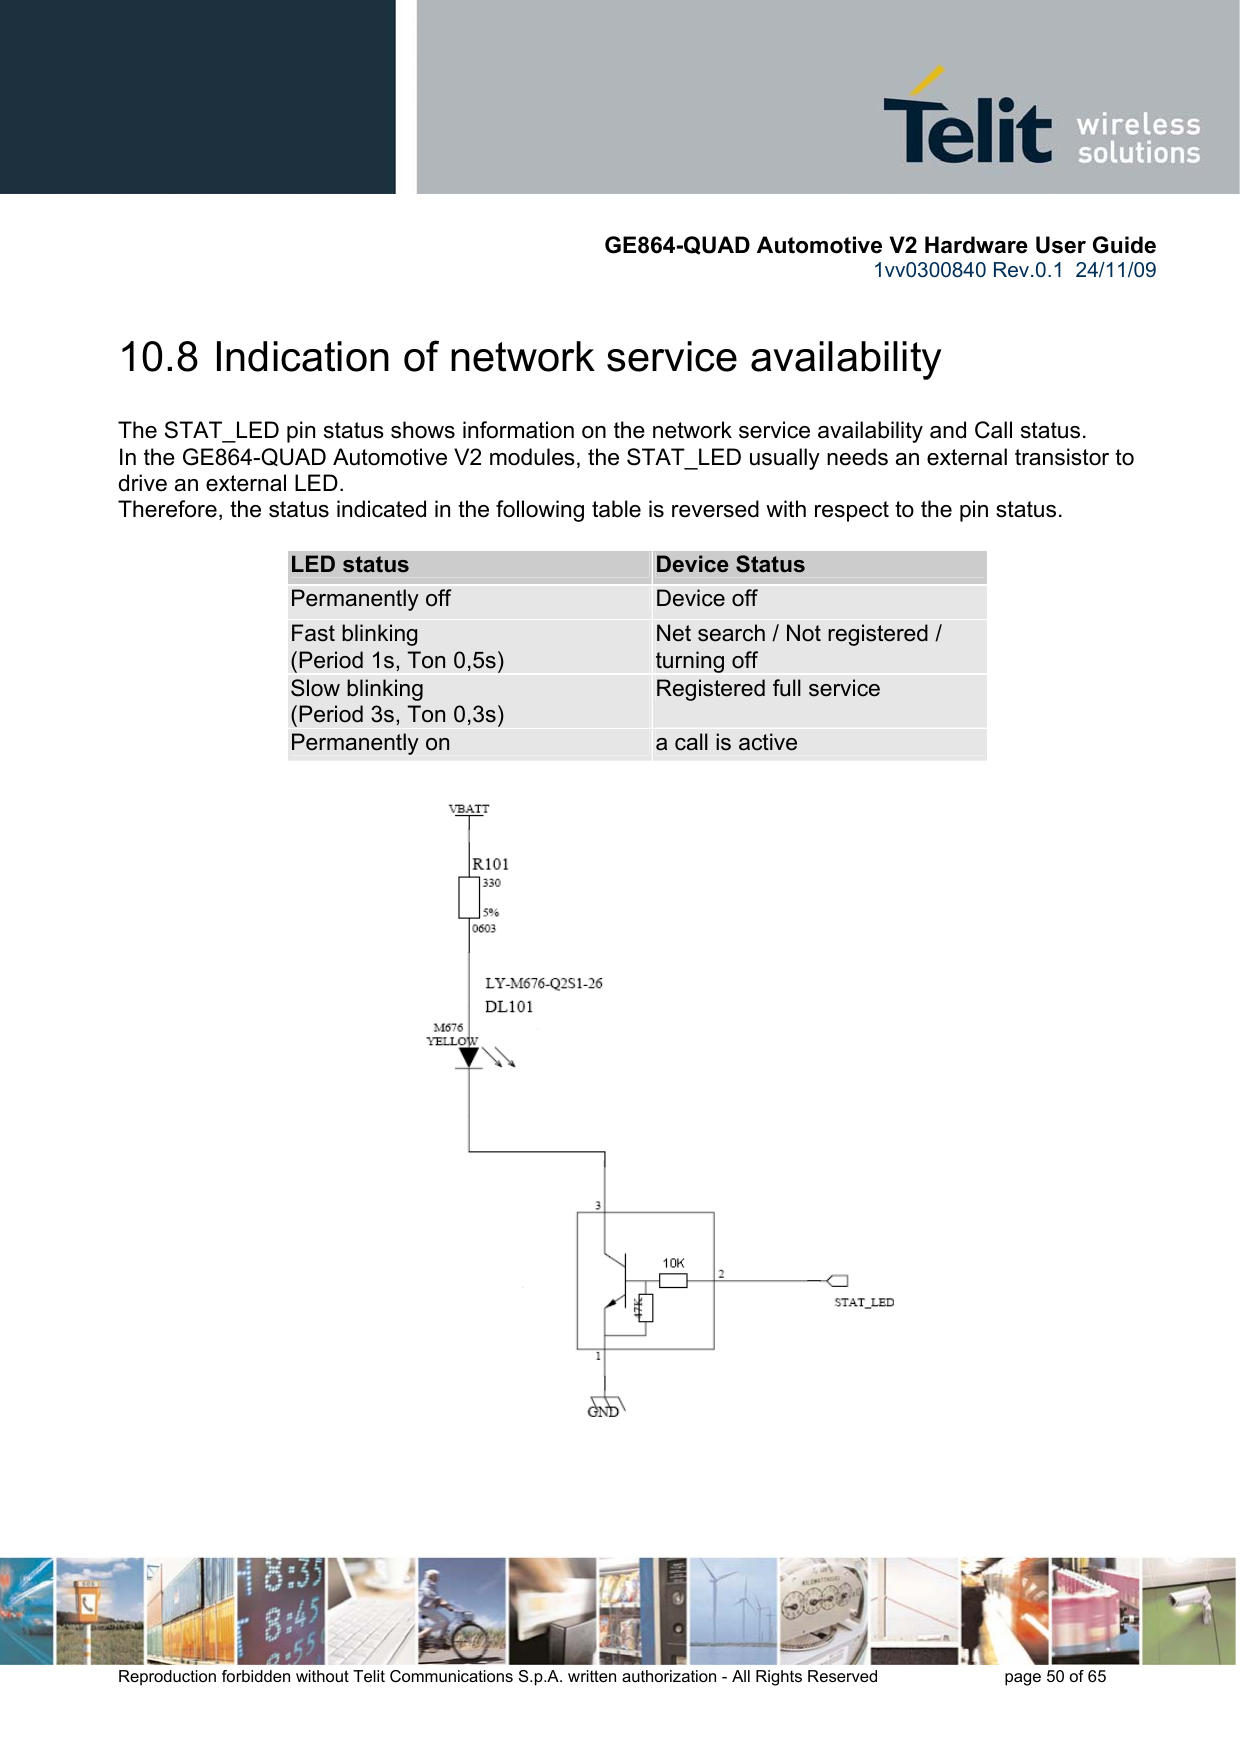       GE864-QUAD Automotive V2 Hardware User Guide 1vv0300840 Rev.0.1  24/11/09      Reproduction forbidden without Telit Communications S.p.A. written authorization - All Rights Reserved    page 50 of 65  10.8  Indication of network service availability The STAT_LED pin status shows information on the network service availability and Call status.  In the GE864-QUAD Automotive V2 modules, the STAT_LED usually needs an external transistor to drive an external LED. Therefore, the status indicated in the following table is reversed with respect to the pin status.             LED status  Device Status Permanently off  Device off Fast blinking  (Period 1s, Ton 0,5s) Net search / Not registered / turning off Slow blinking (Period 3s, Ton 0,3s) Registered full service Permanently on  a call is active        